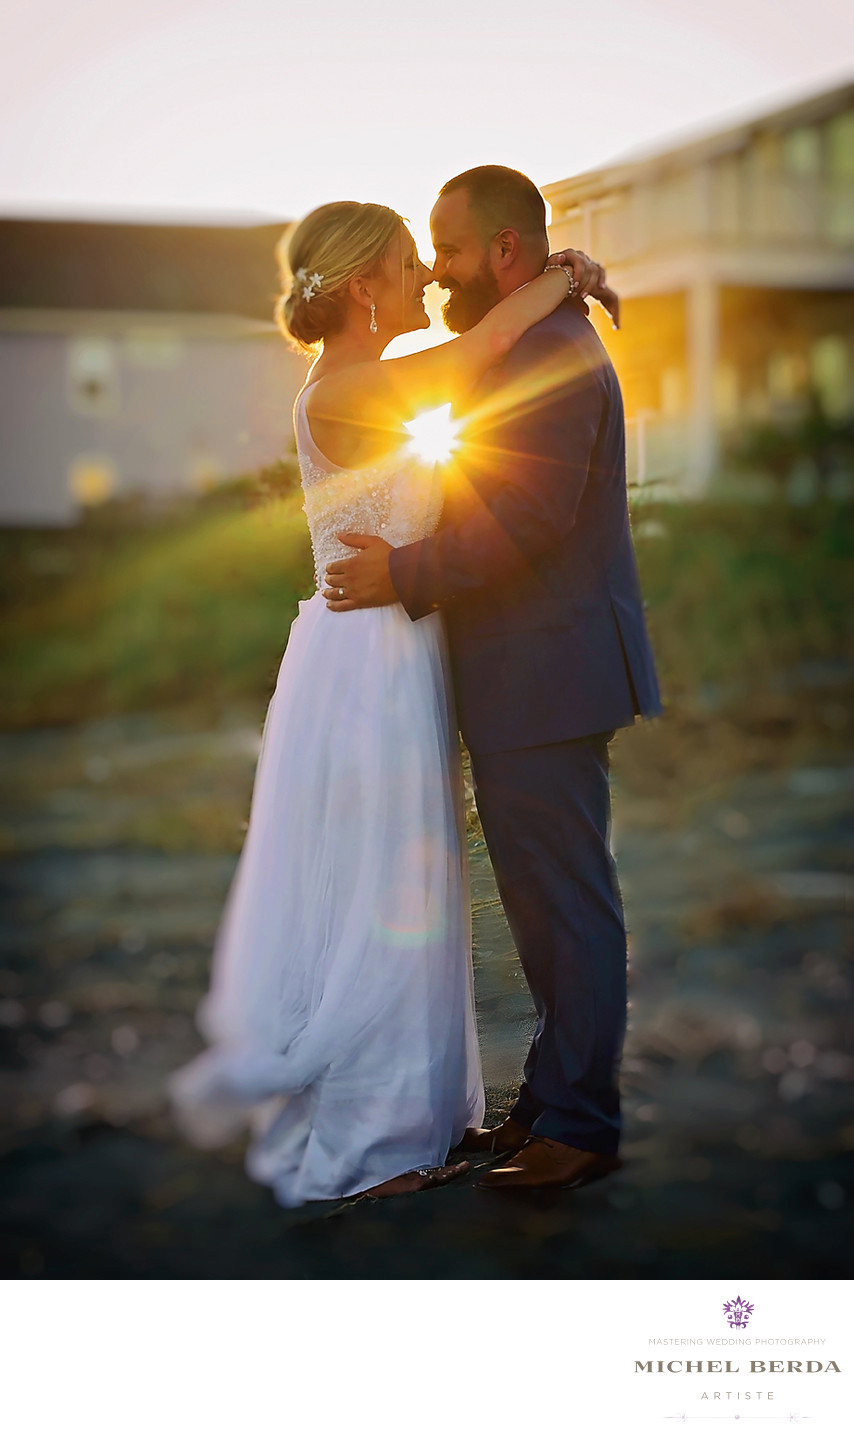 A wedding couple with the perfect sunset photo.